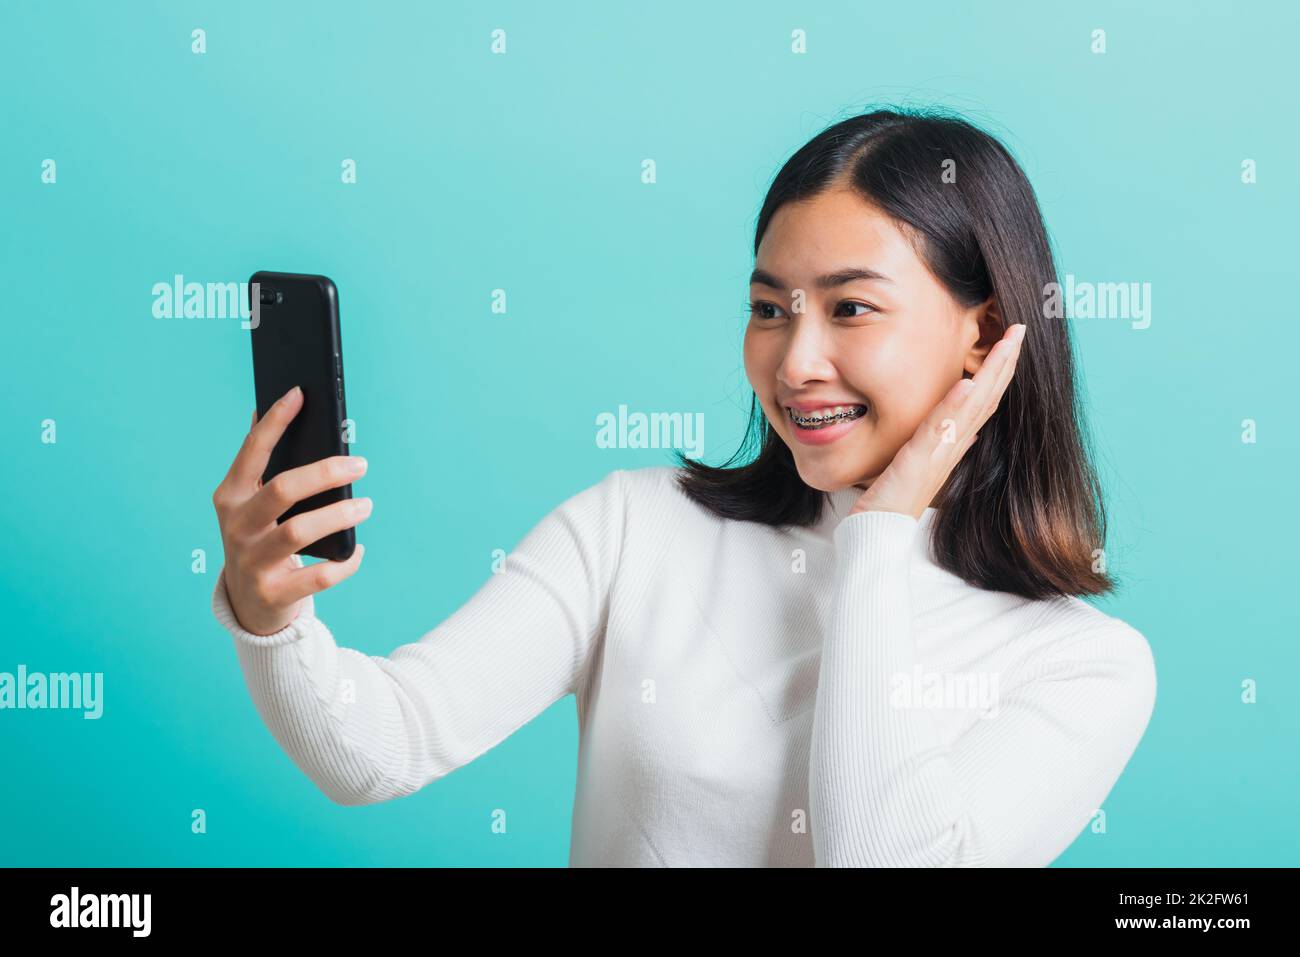 woman smile she using a smartphone to selfie photo Stock Photo